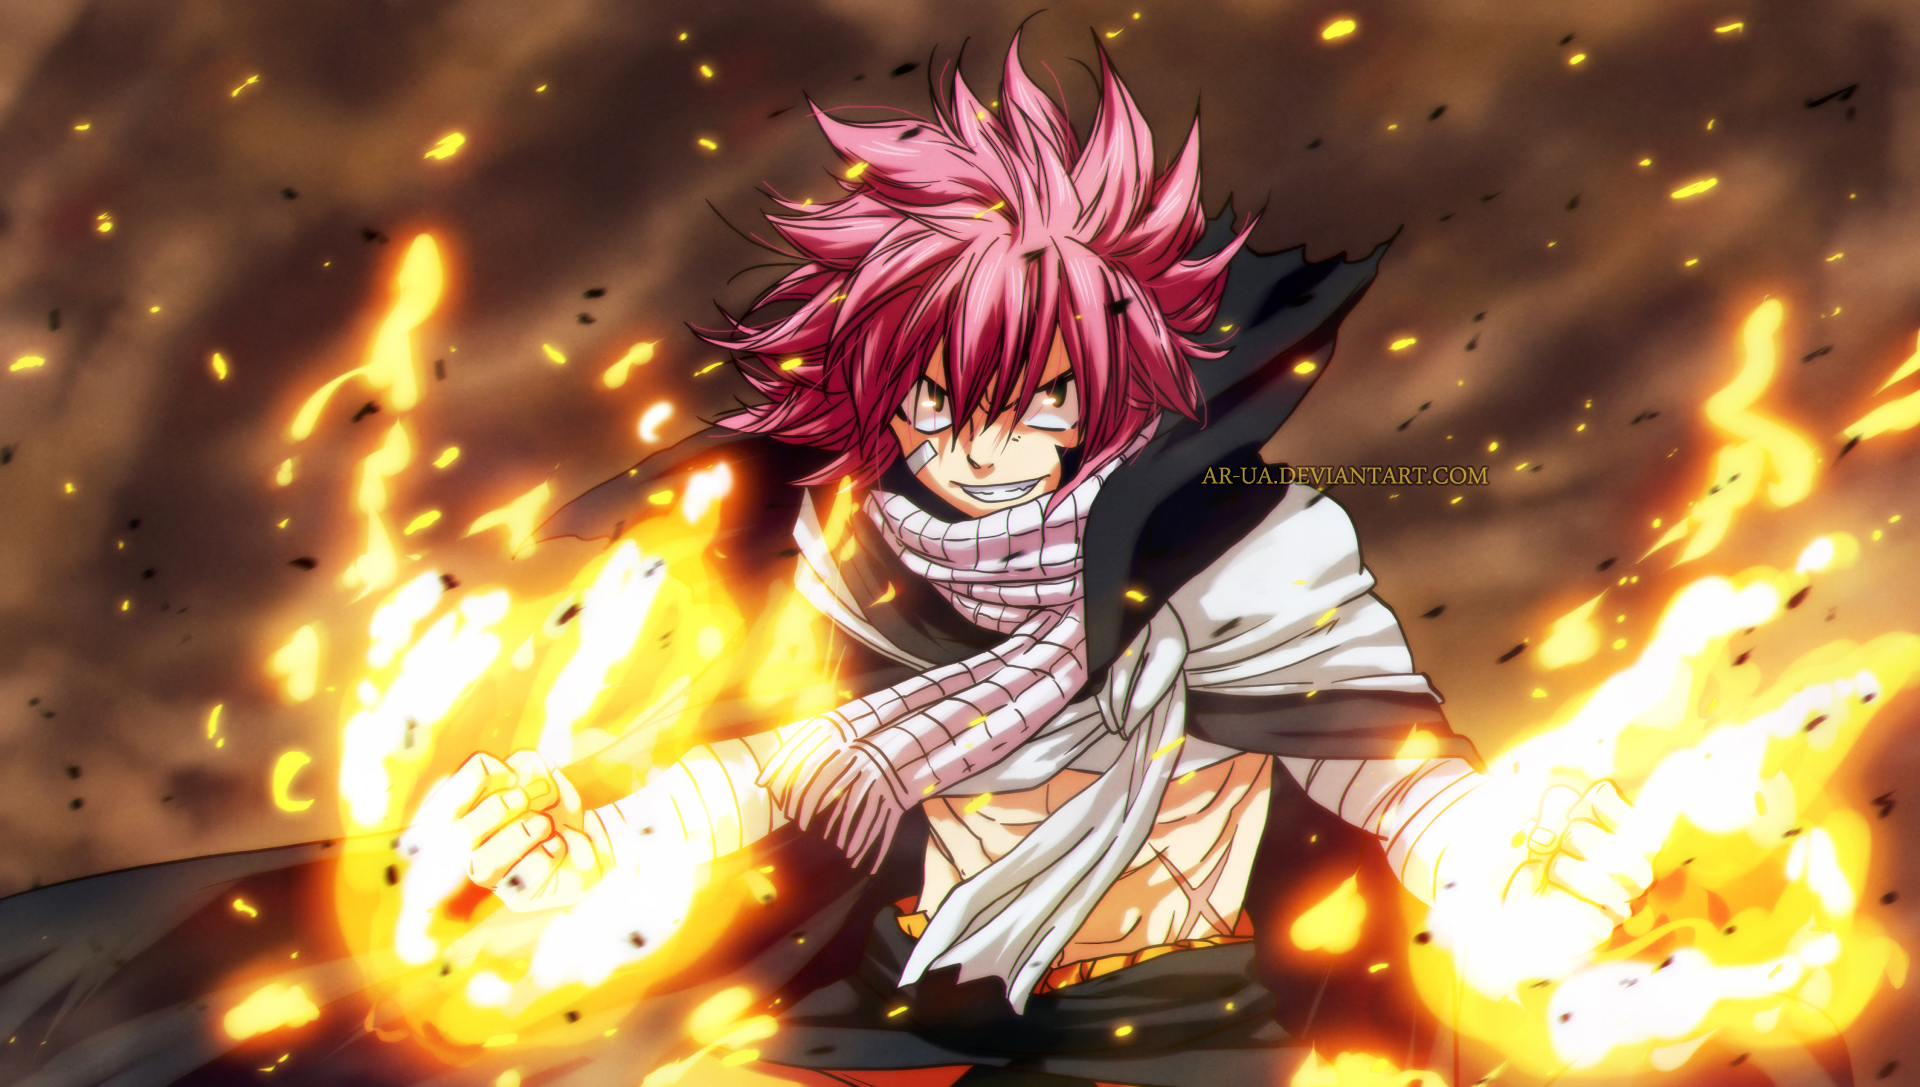 4. Natsu Dragneel from Fairy Tail - wide 10